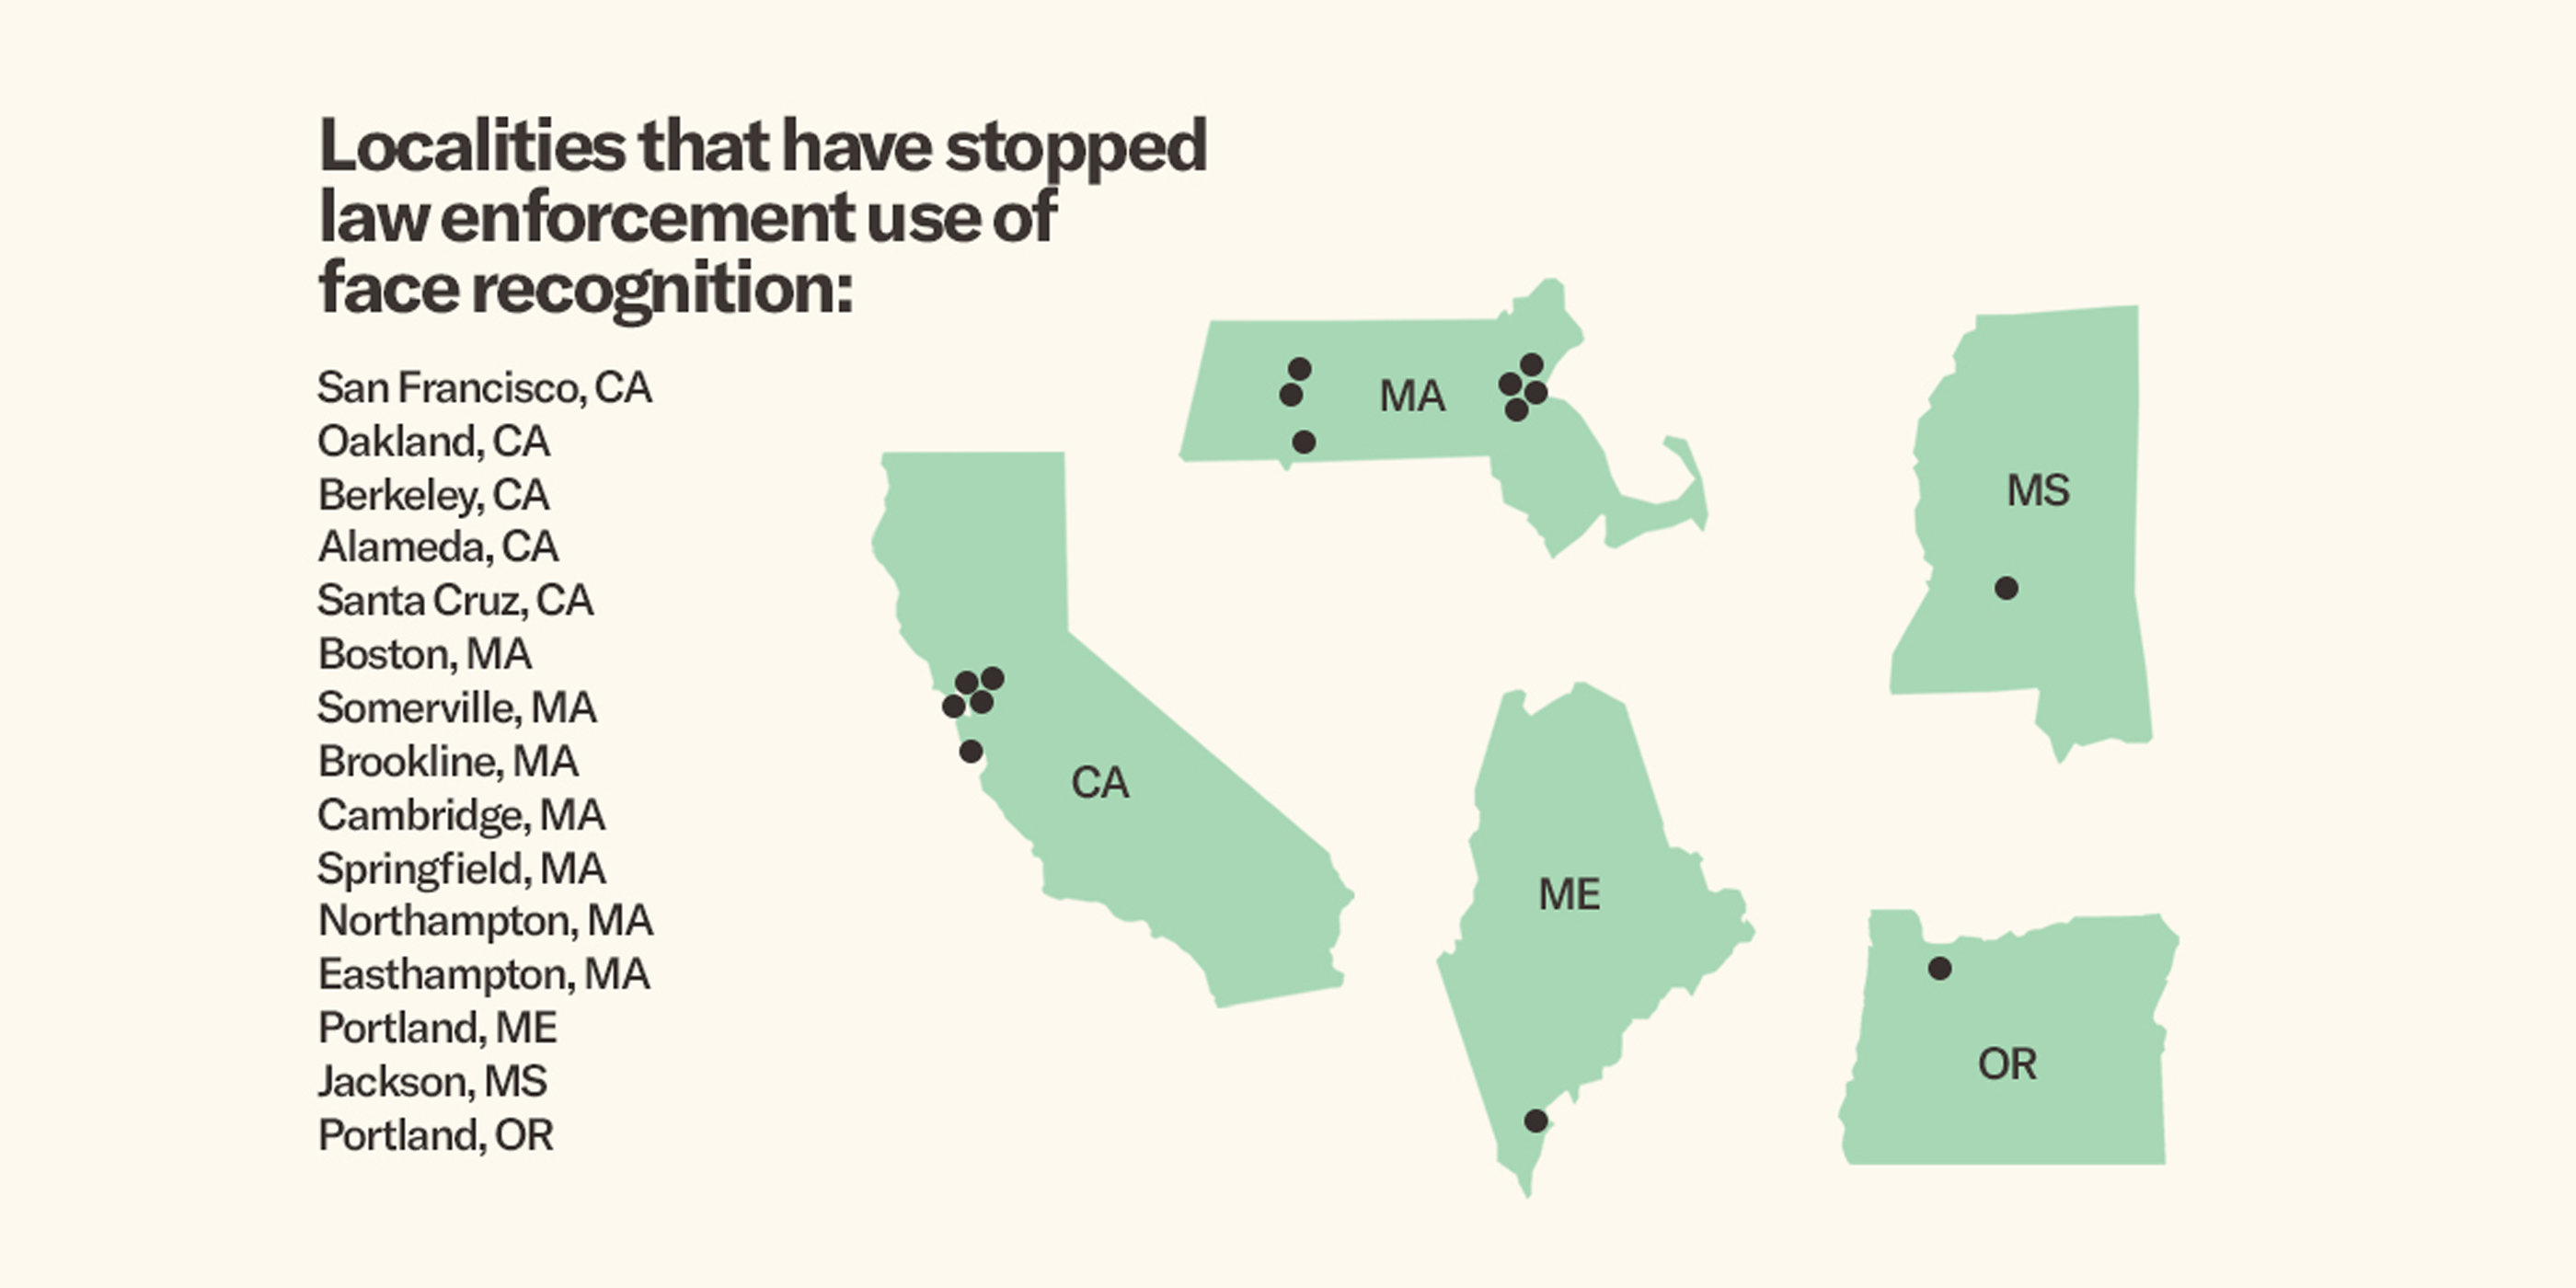 Localities that have stopped law enforcement use of face recognition.